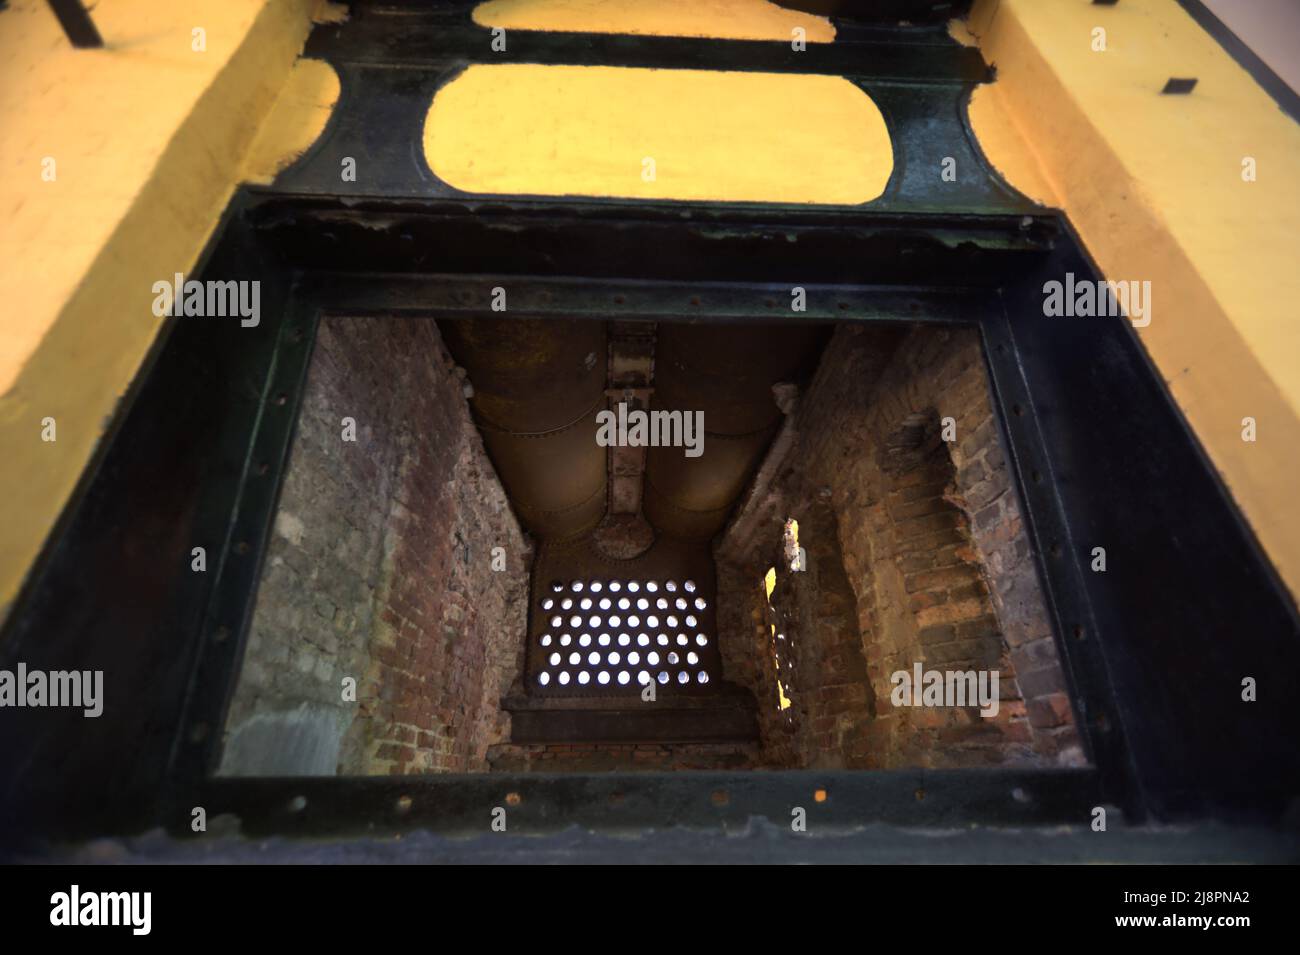 A look to the inside part of a coal-fired steam generator used for cooking during colonial coal mining operation in Sawahlunto, a former coal-mining town established by Dutch colonialists in late 19th century in West Sumatra, Indonesia. Stock Photo